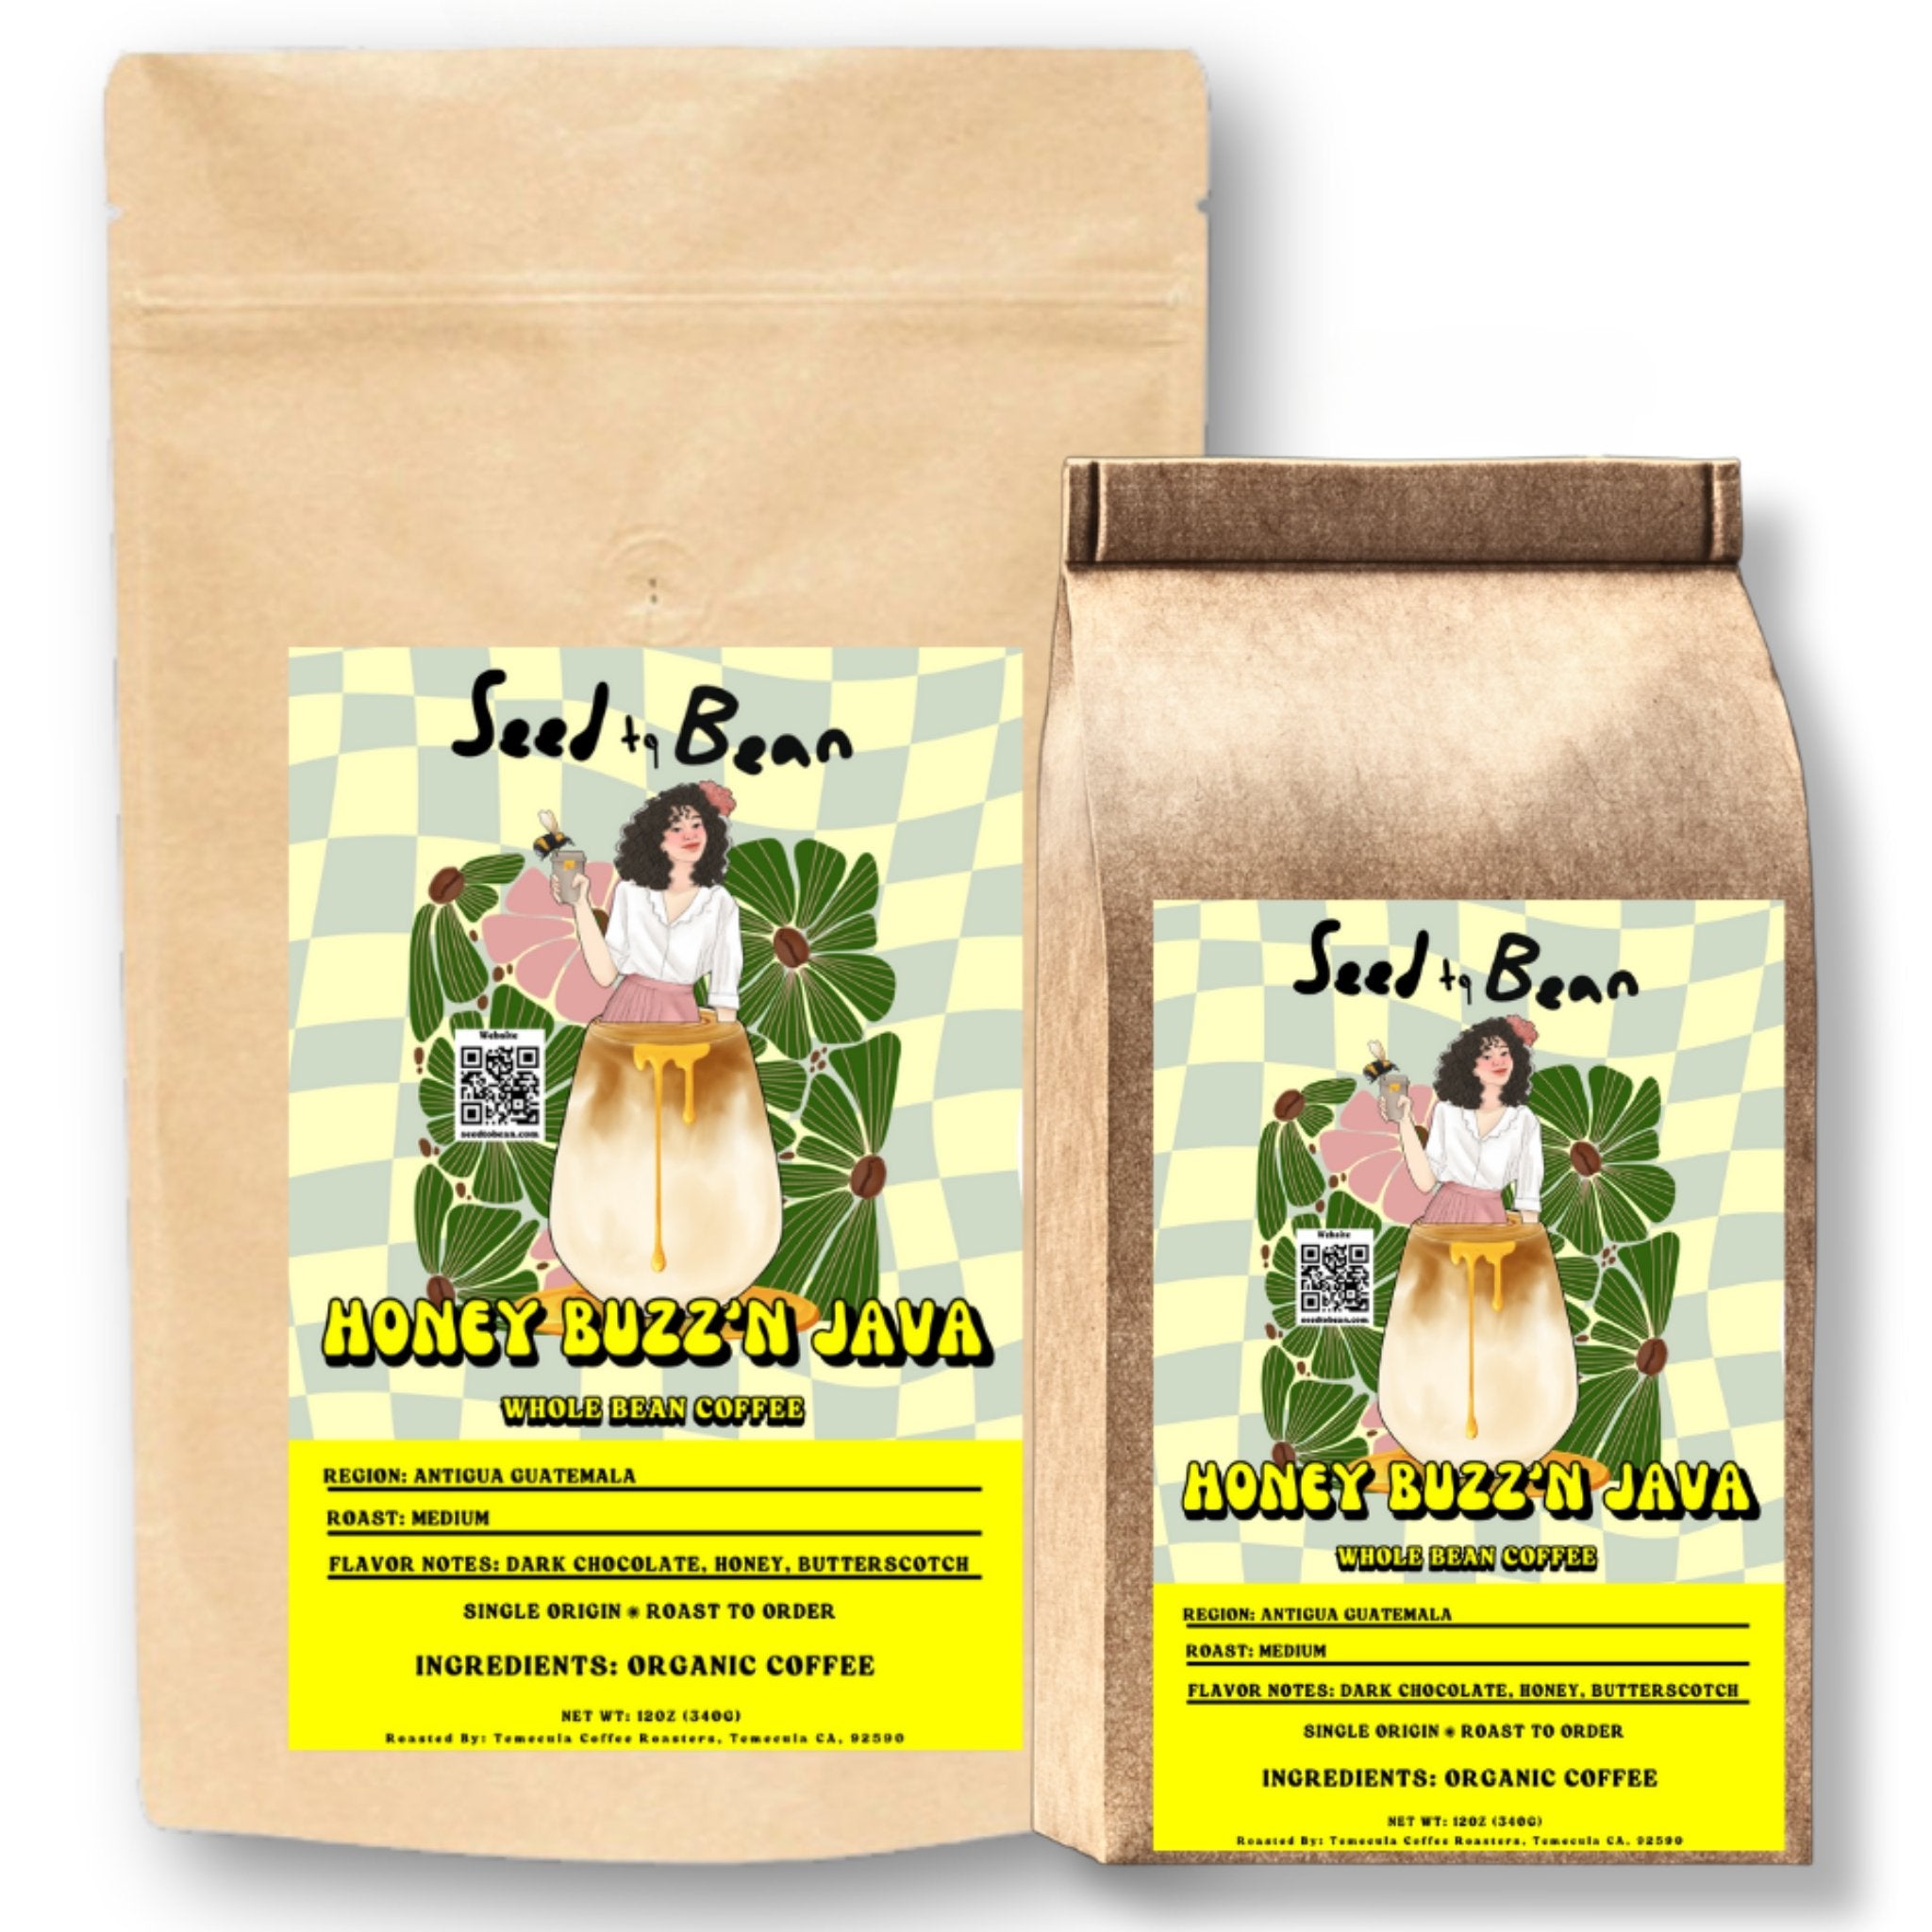 Honey Buzz'n Java - Seed to BeanCoffee BeansSeed to Bean